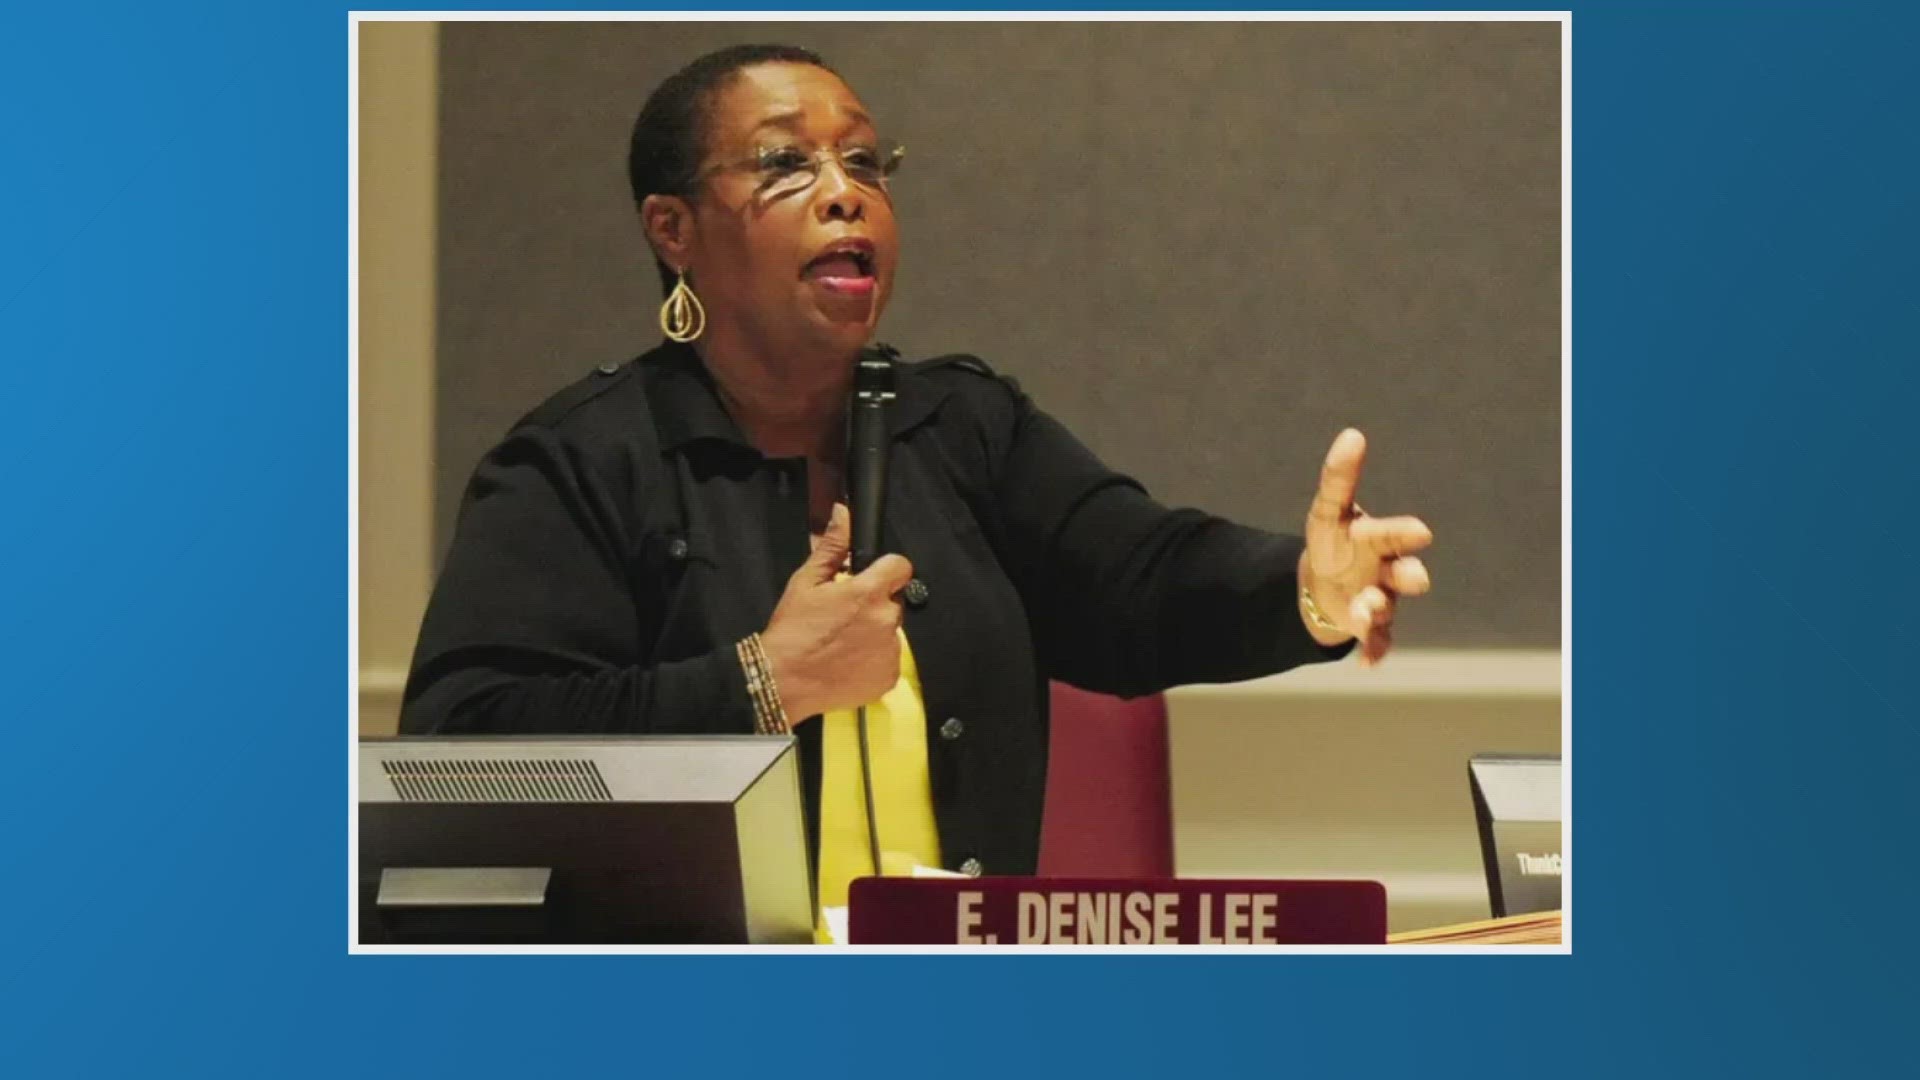 E. Denise Lee represented Northeast Florida on the Jacksonville City Council and in the Florida House of Representatives for more than 20 years.